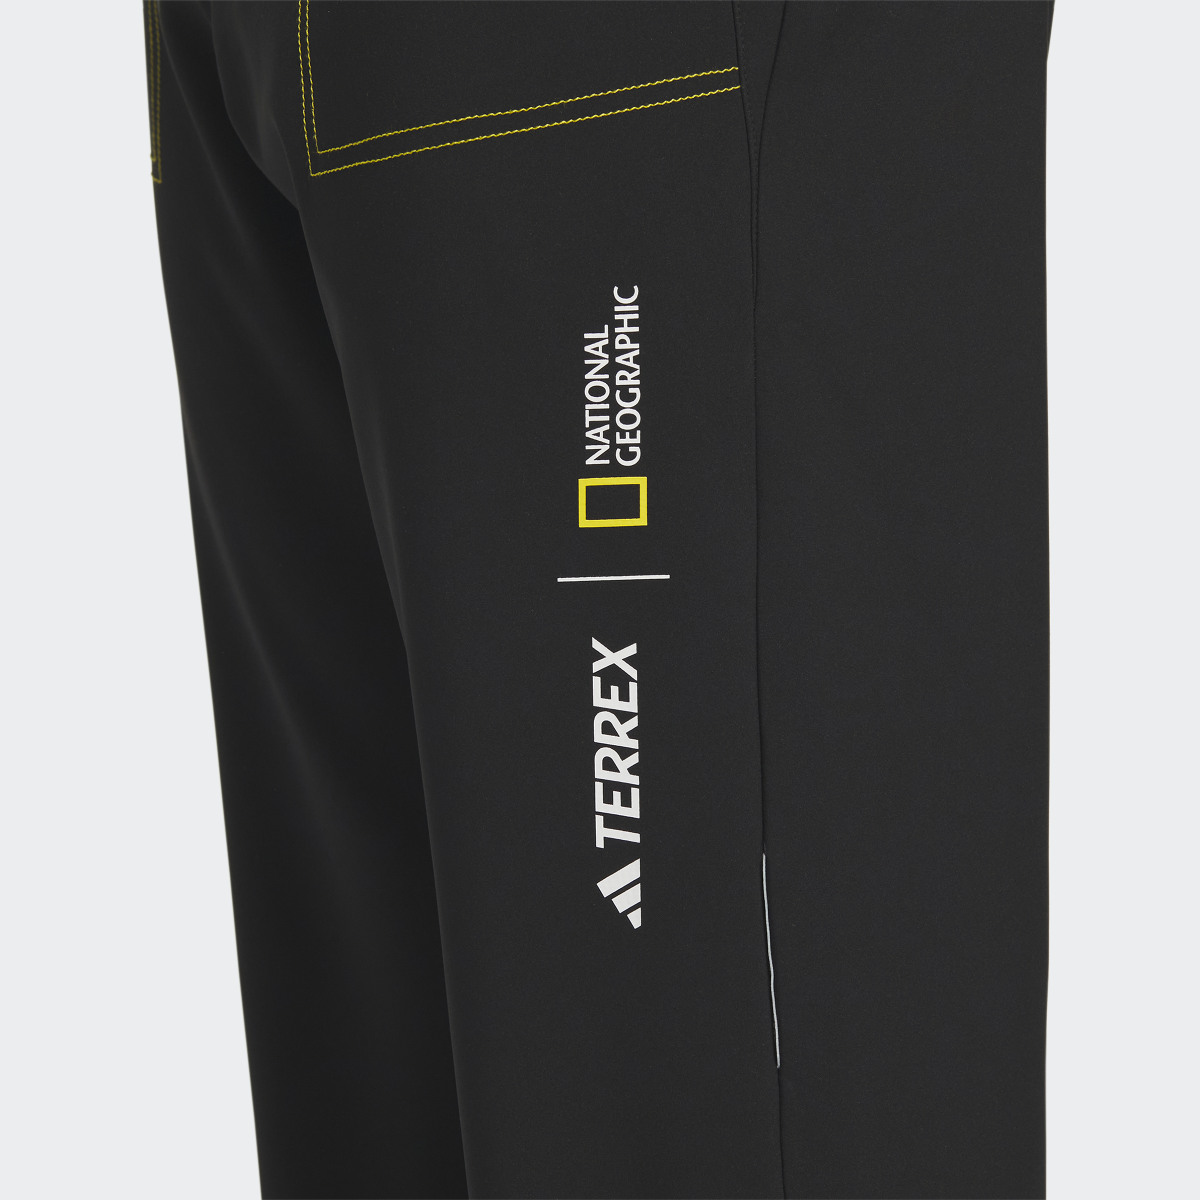 Adidas National Geographic Soft Shell Trousers. 7